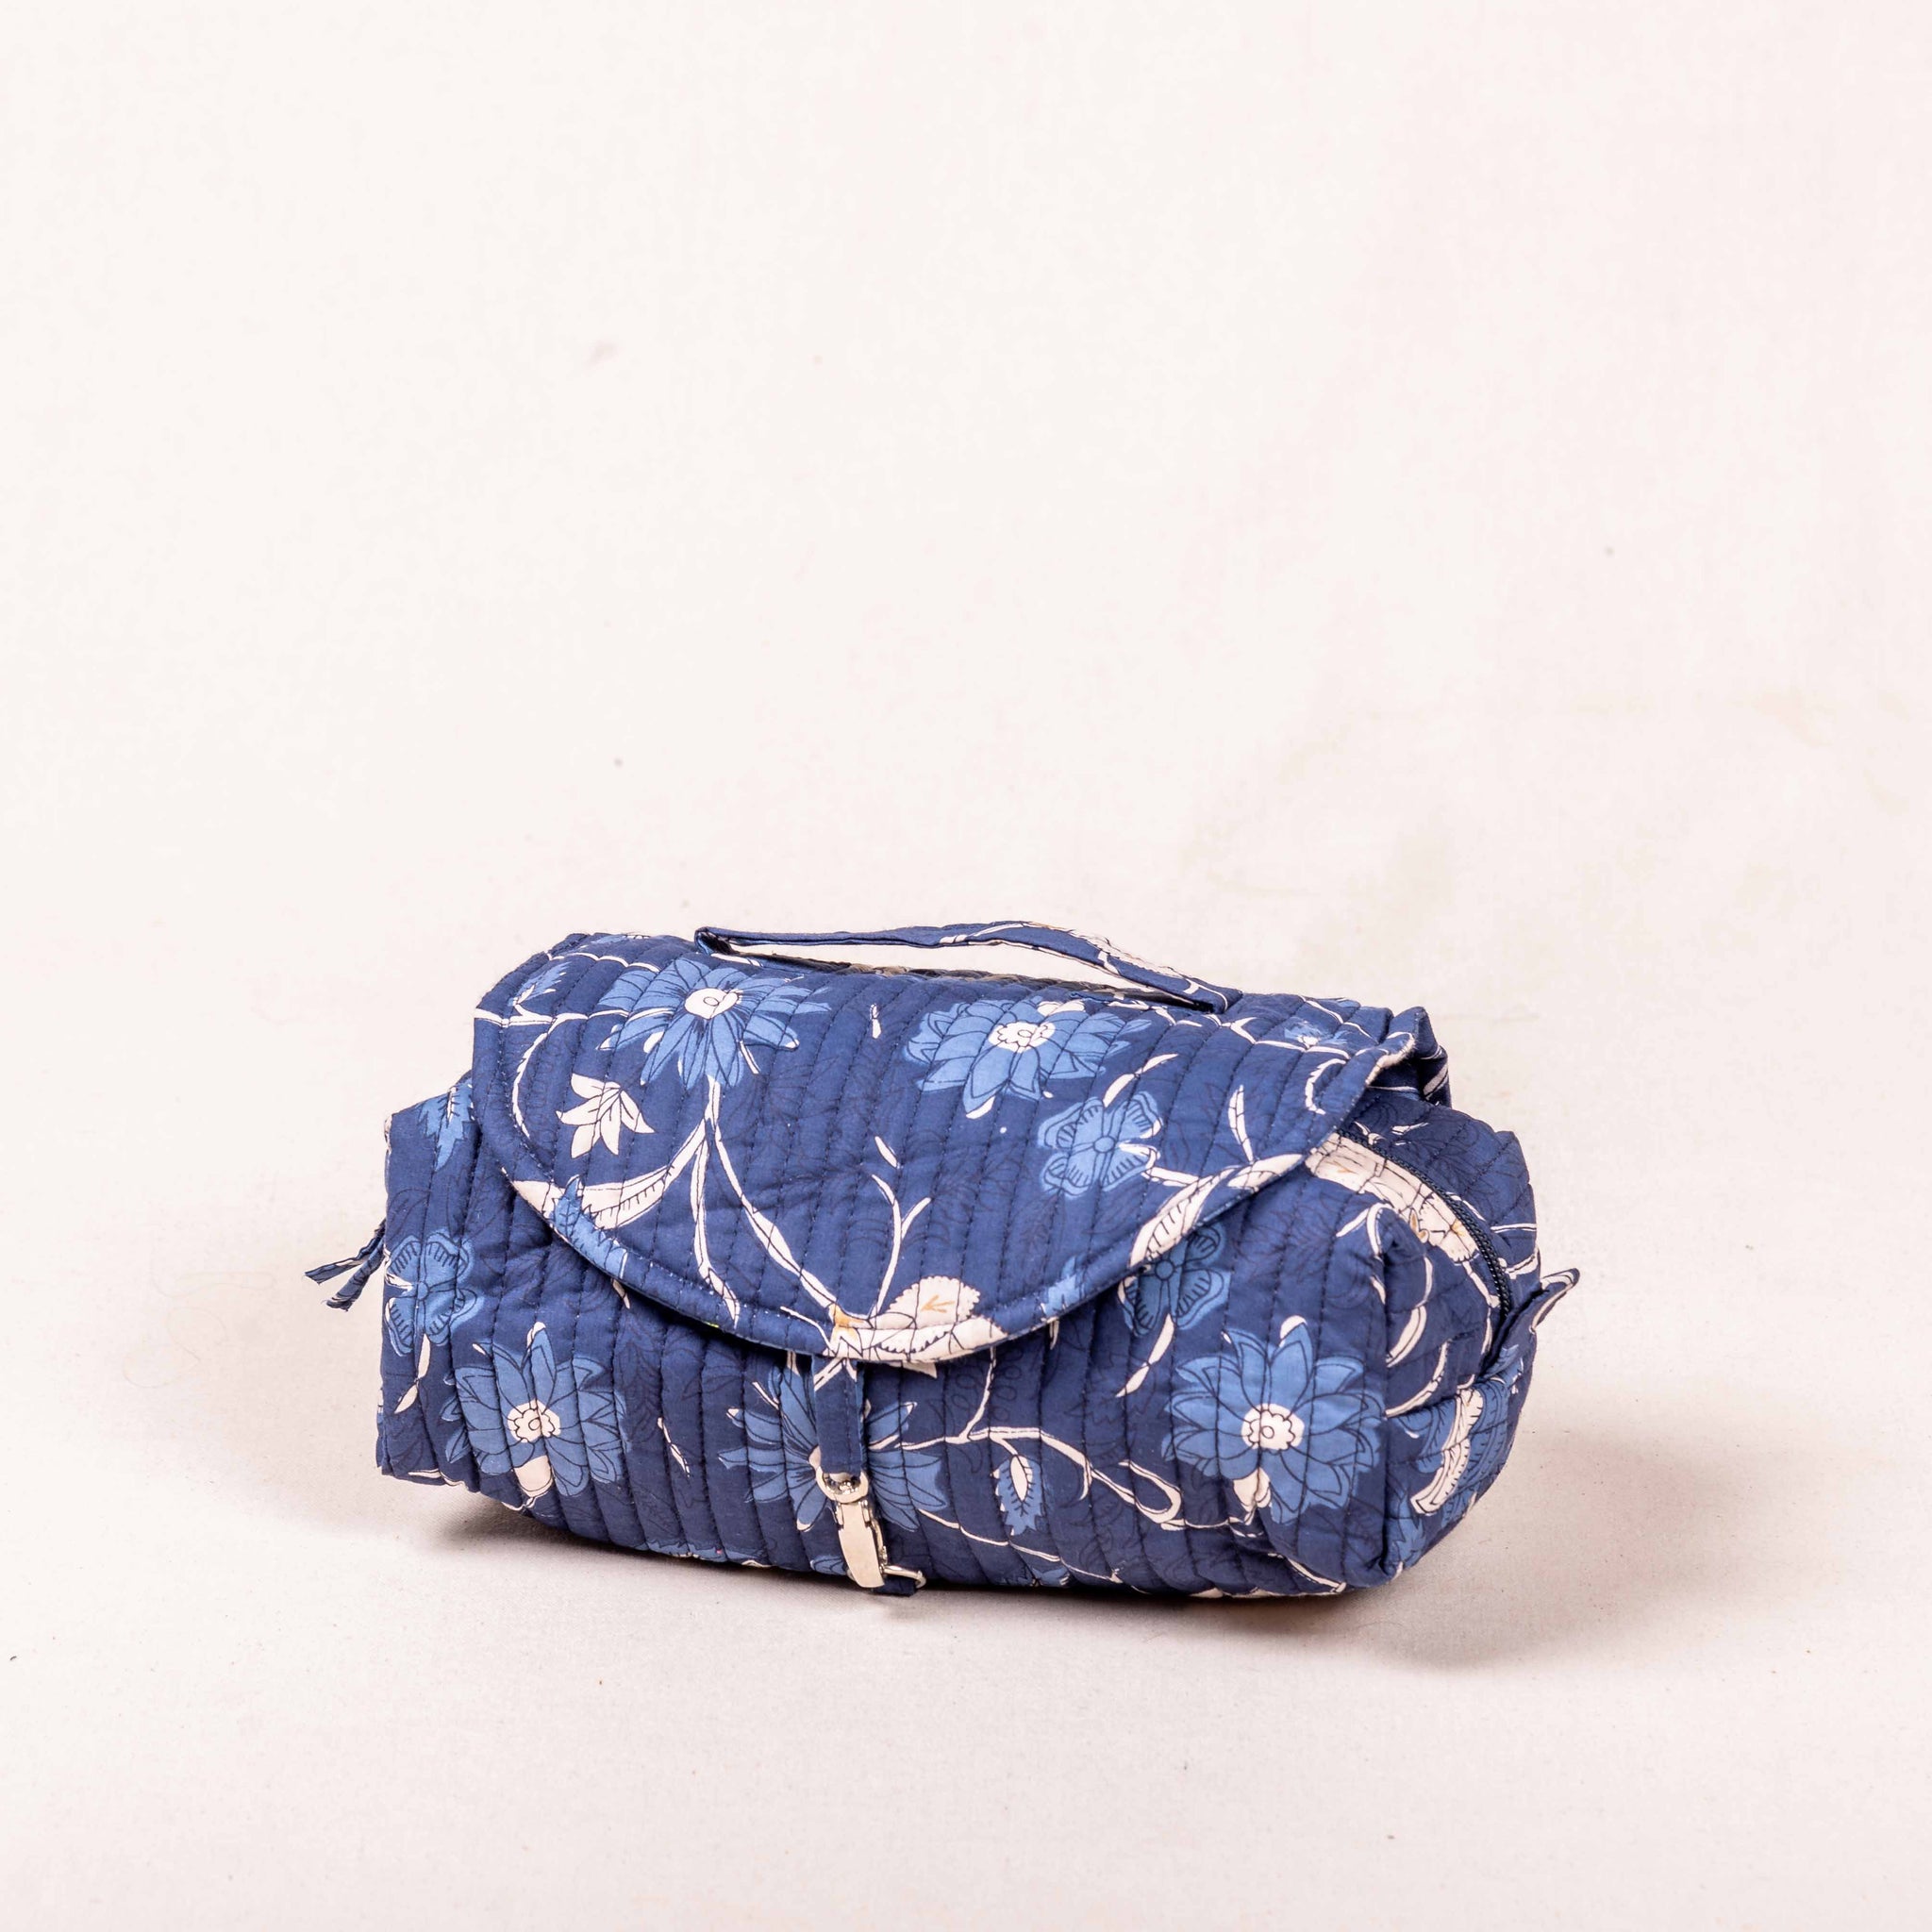 Indu Make-up Pouch - Blue Printed fabric